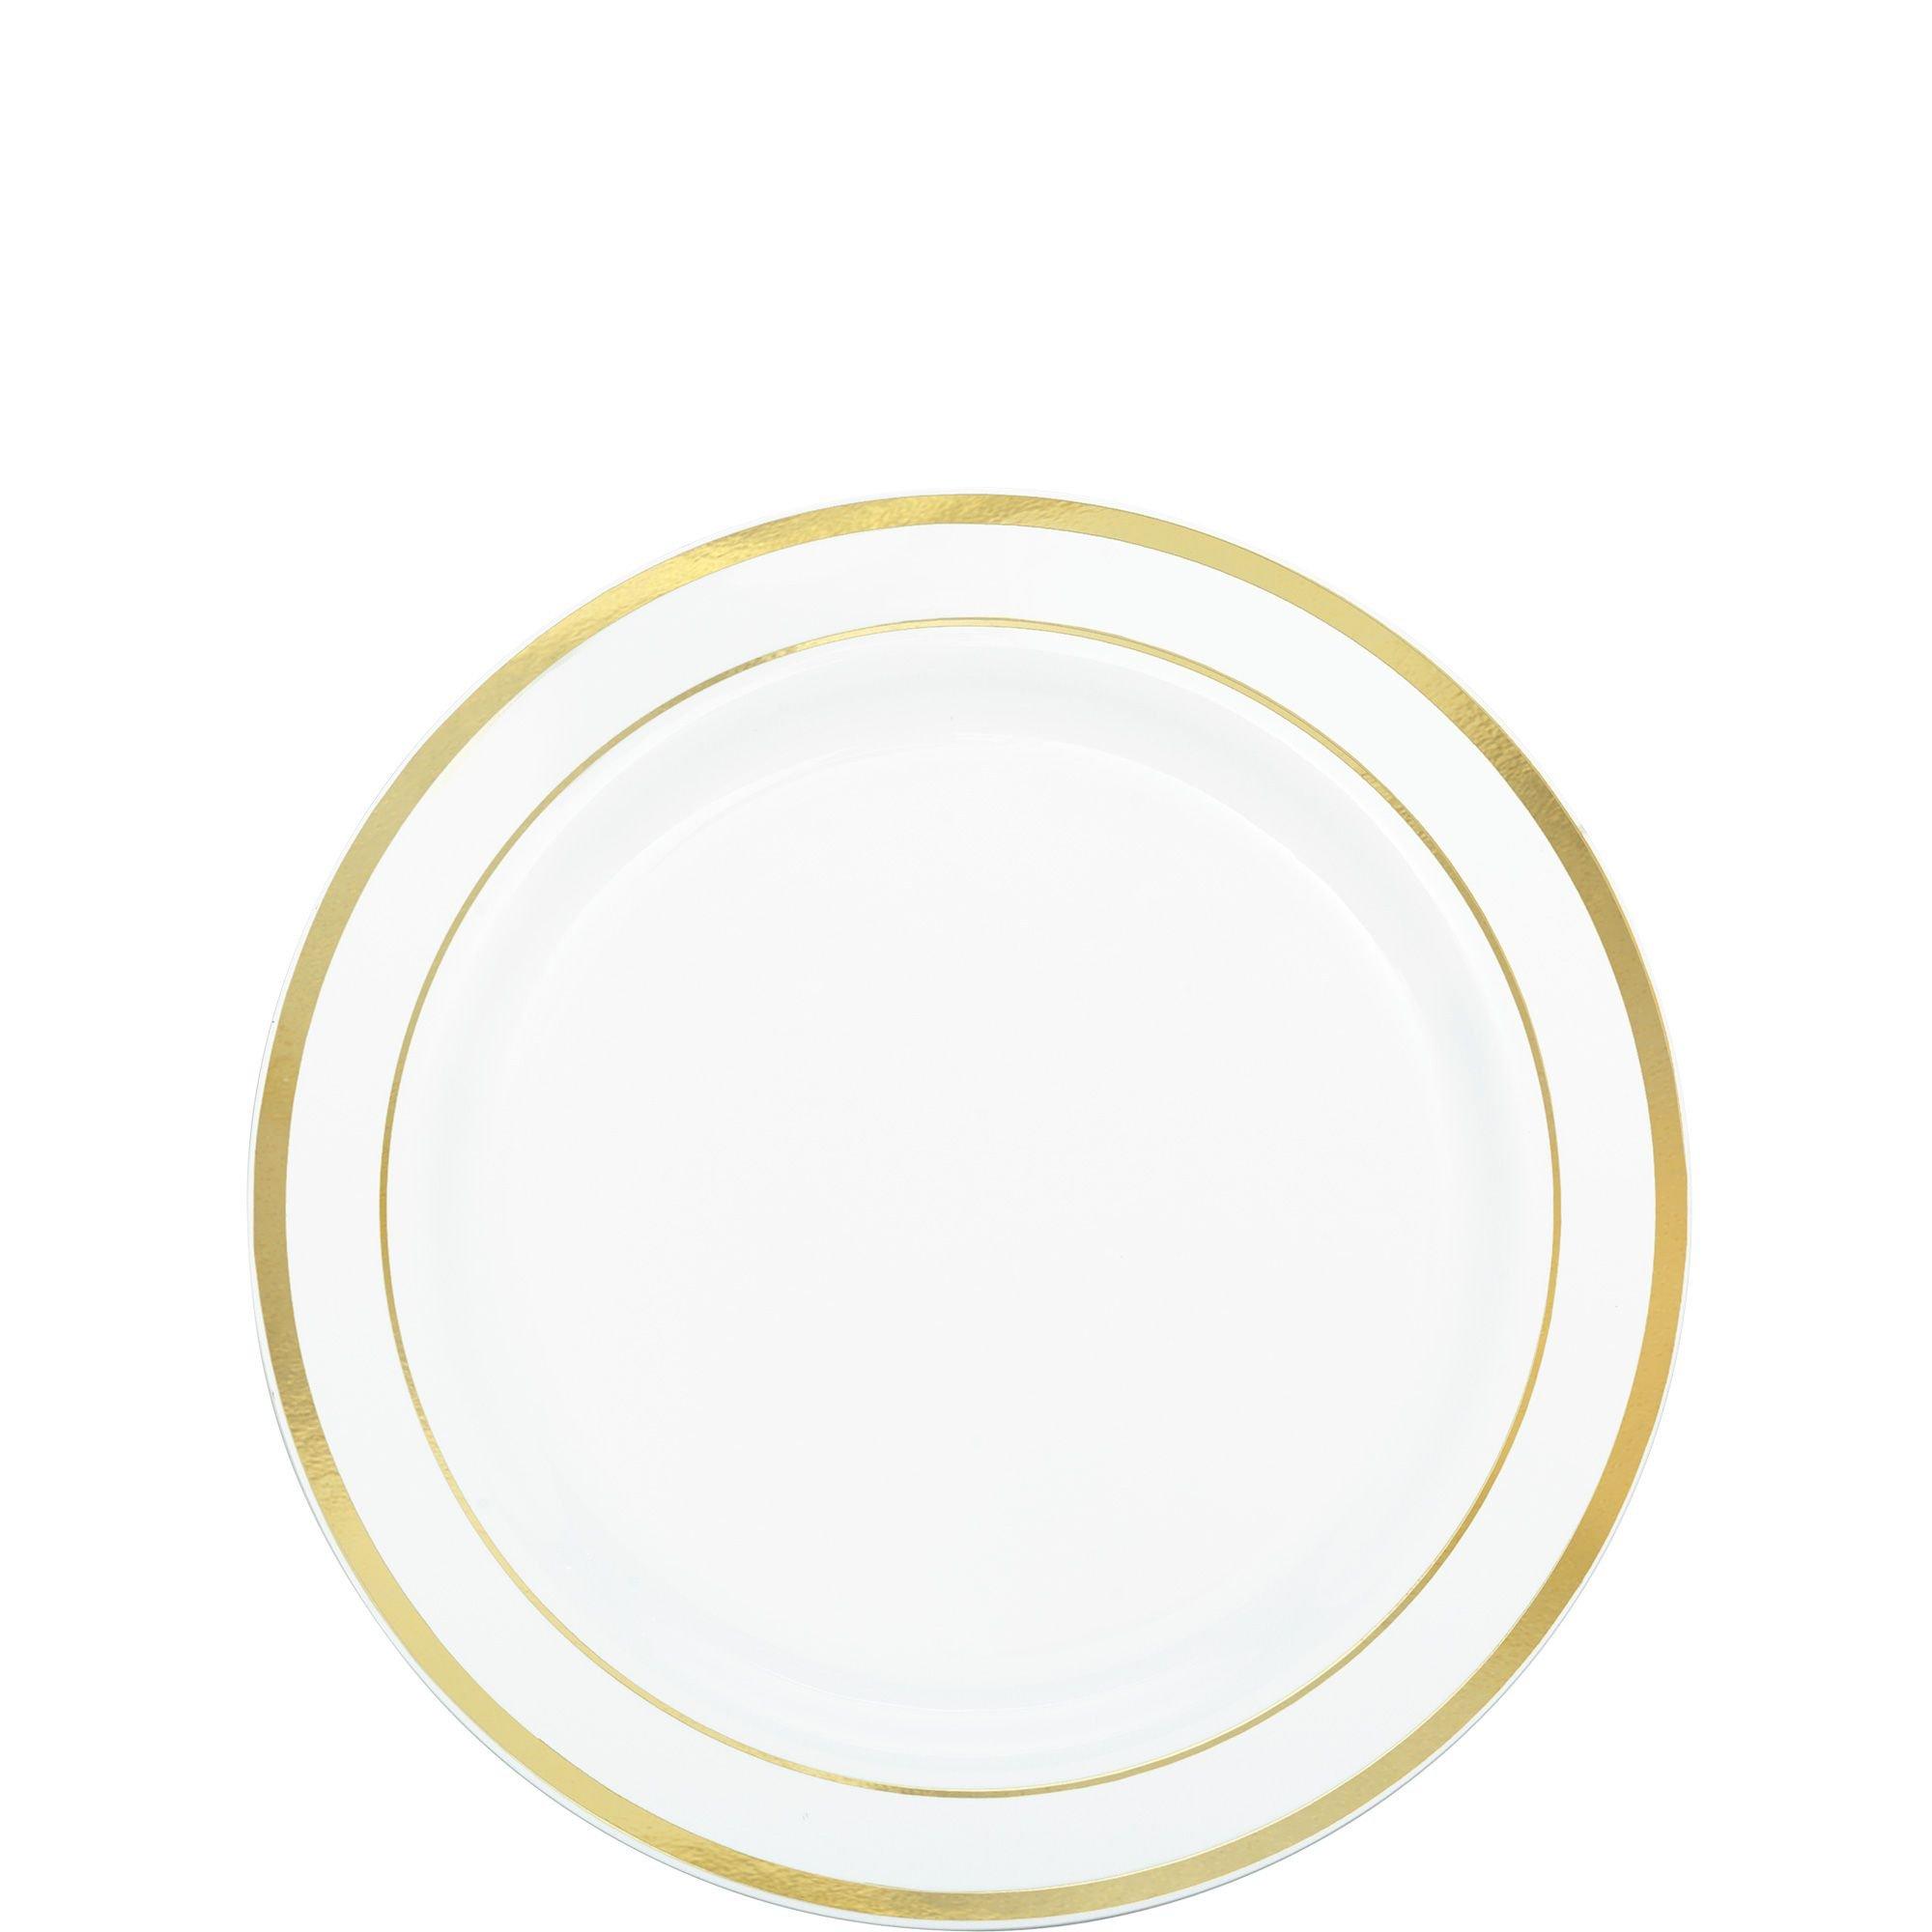 10 Pack White And Gold Brush Stroked Round Plastic Dessert Plates,  Disposable Appetizer Salad Party Plates 7